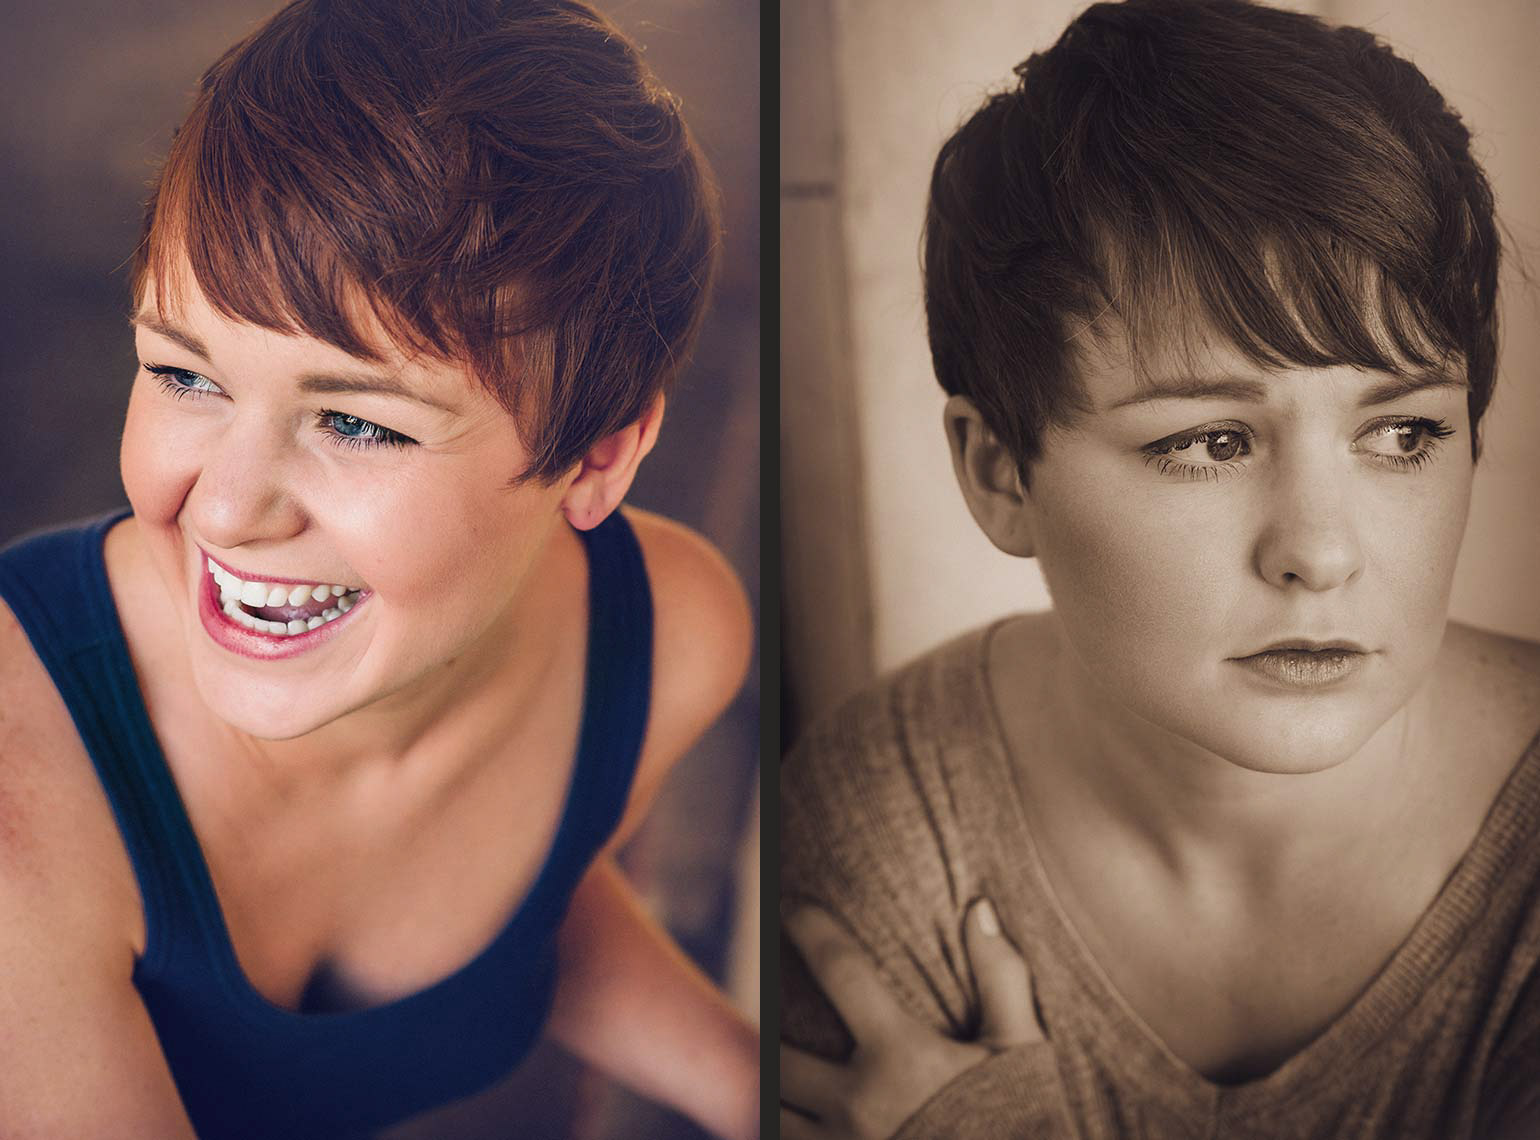 Contrasting emotions from actress Edie Hovey in photos by Brad Buckman. 